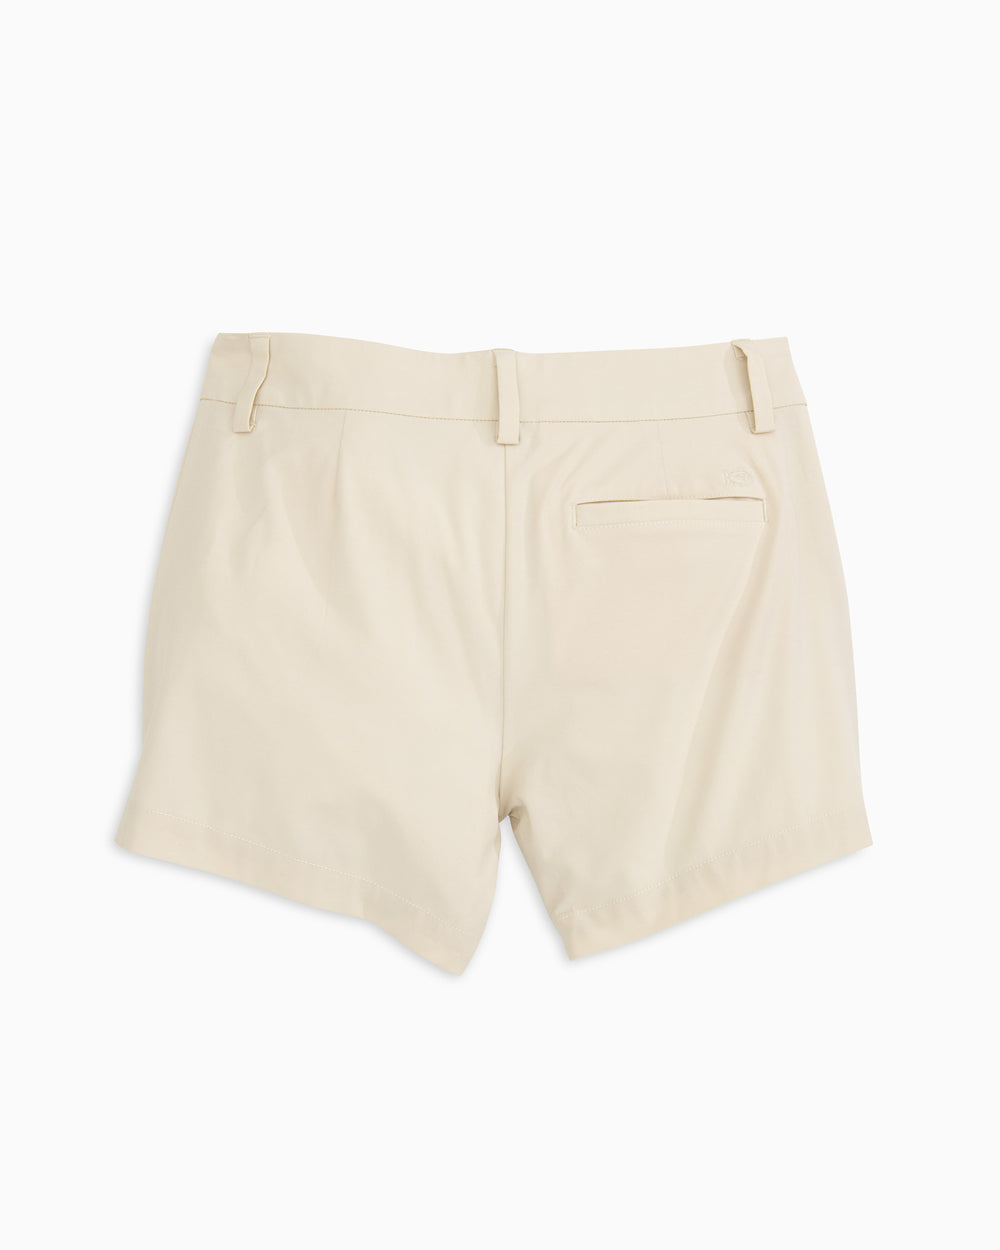 The back view of the Women's Inlet 4 Inch Performance Short by Southern Tide - Stone